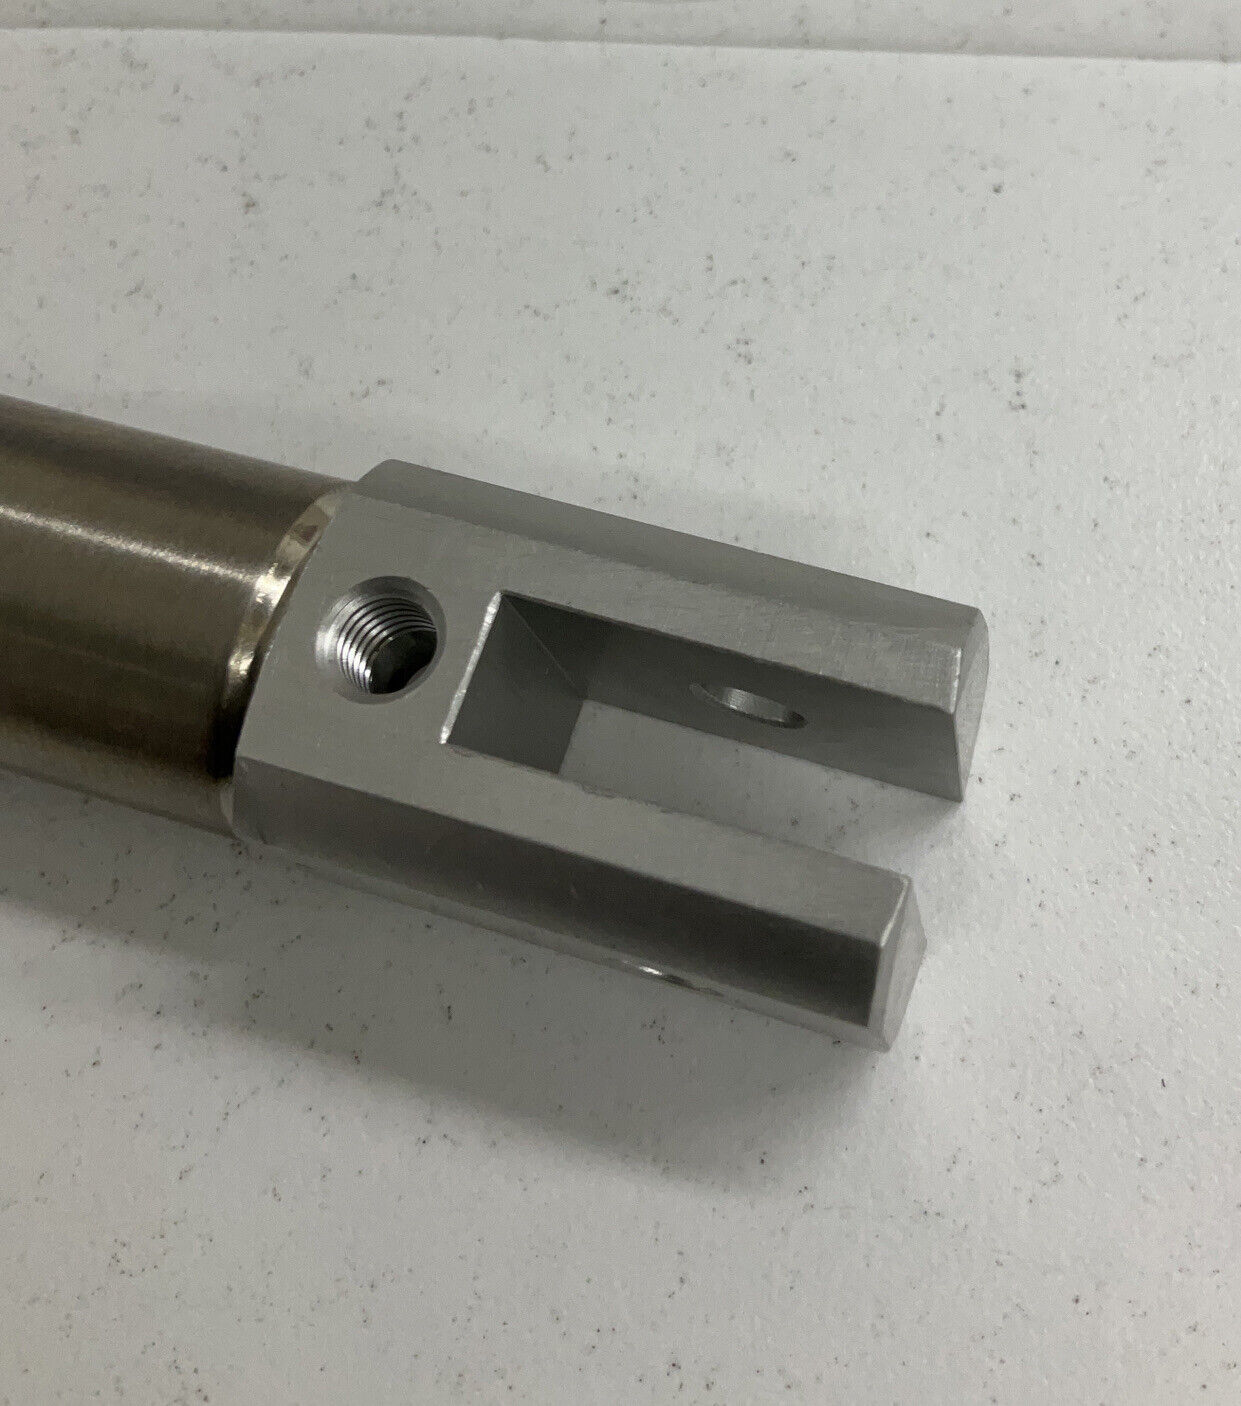 CKD SCPD3-0L-CB-16-45 Pneumatic Cylinder,  Clevis Pin Included (YE161)